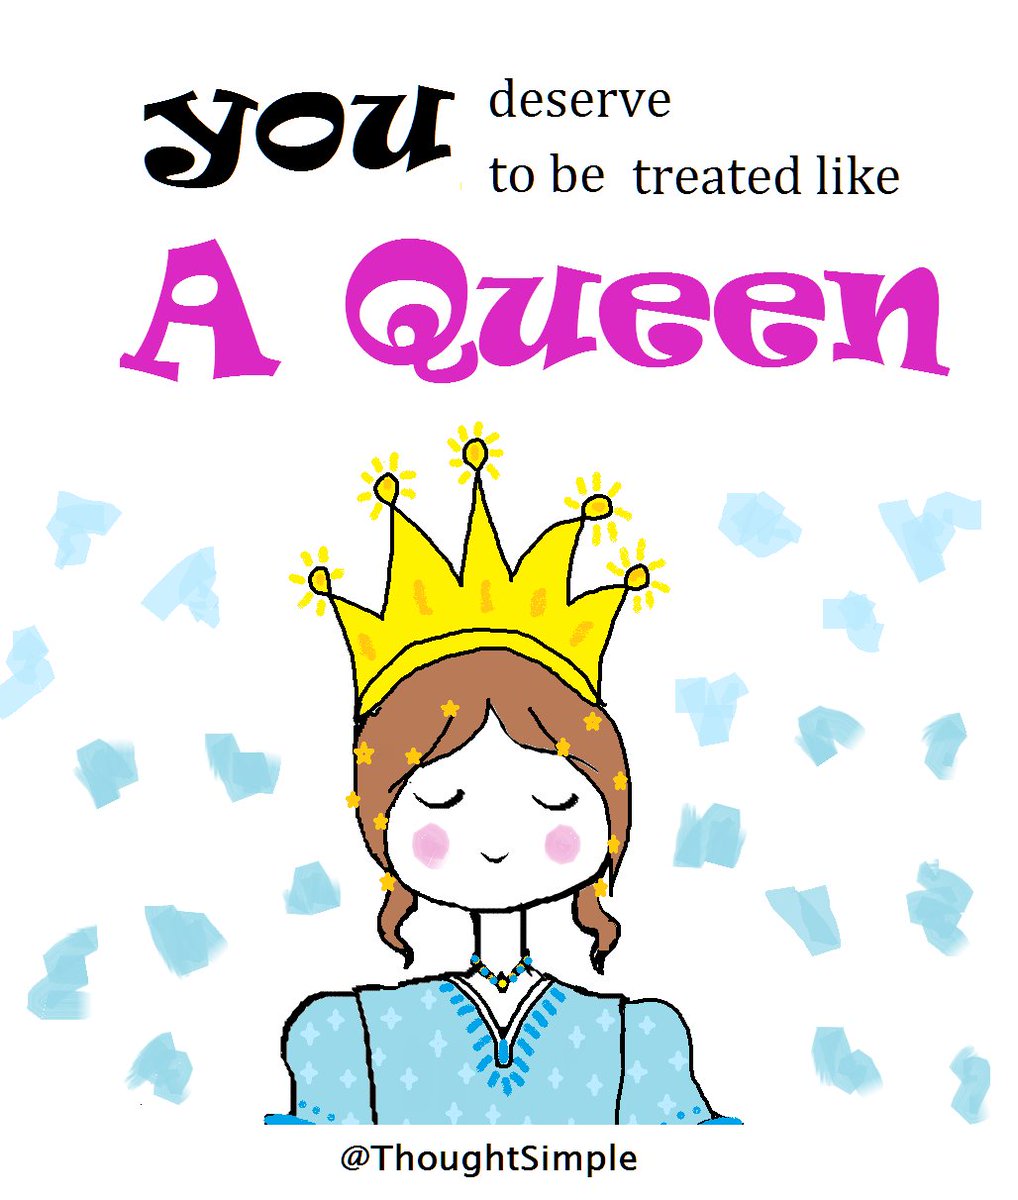 You deserve to be treated like a queen

#quote #quoteoftheday #quotesdaily #motivational #dailymotivation #quotes #quotestoliveby #quotesaboutlife